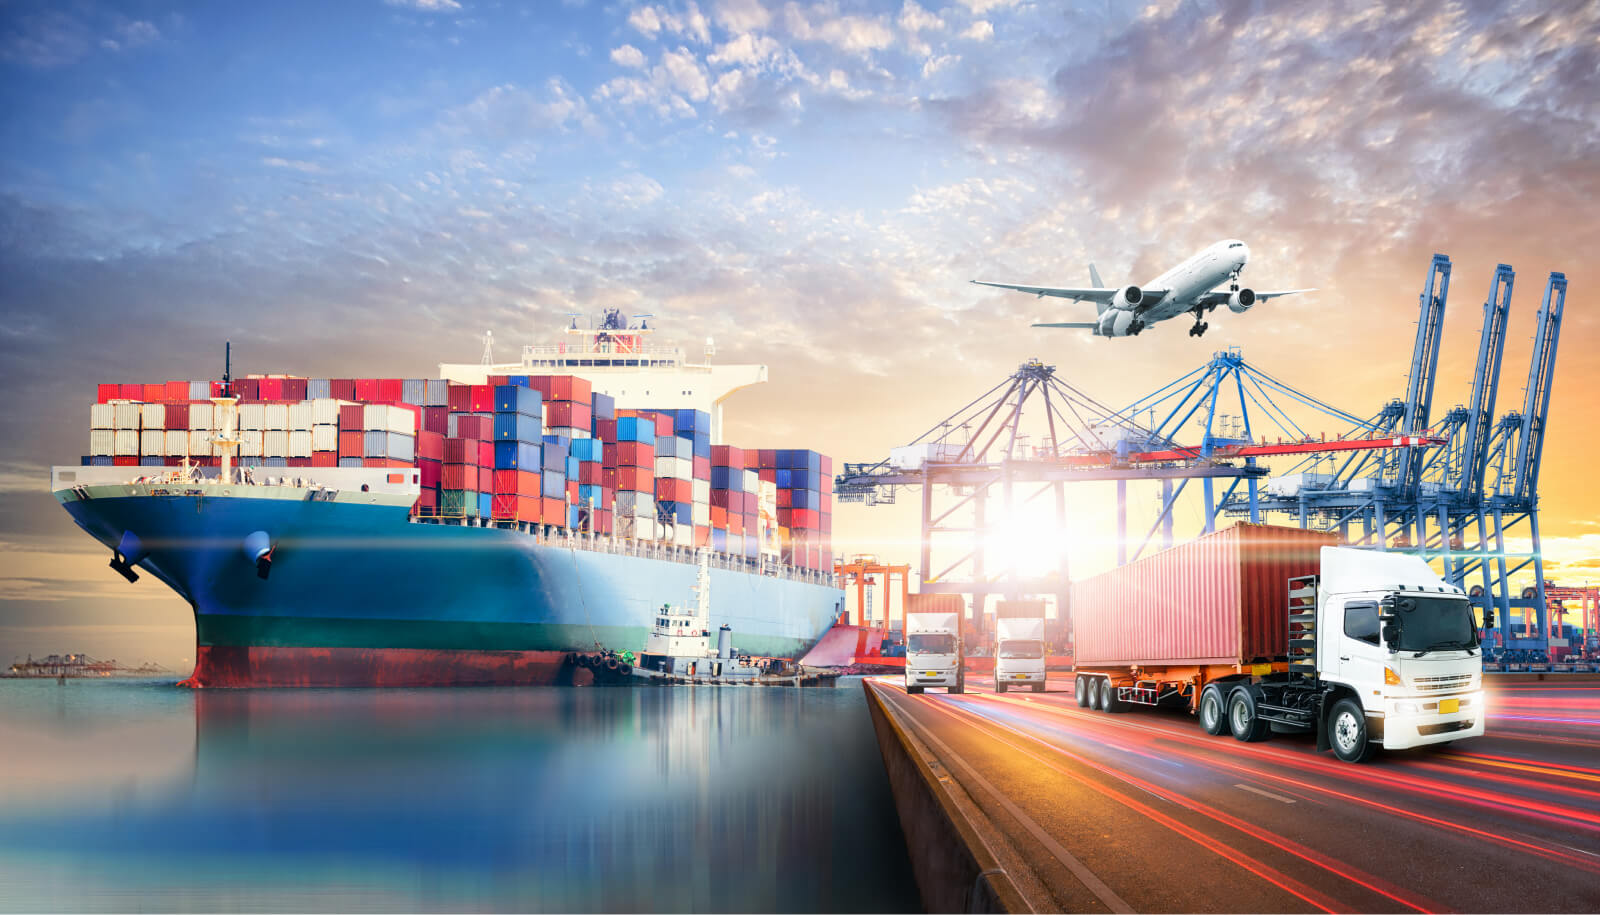 intermodal supply chain with cargo ships, carrier trucks, and air freight